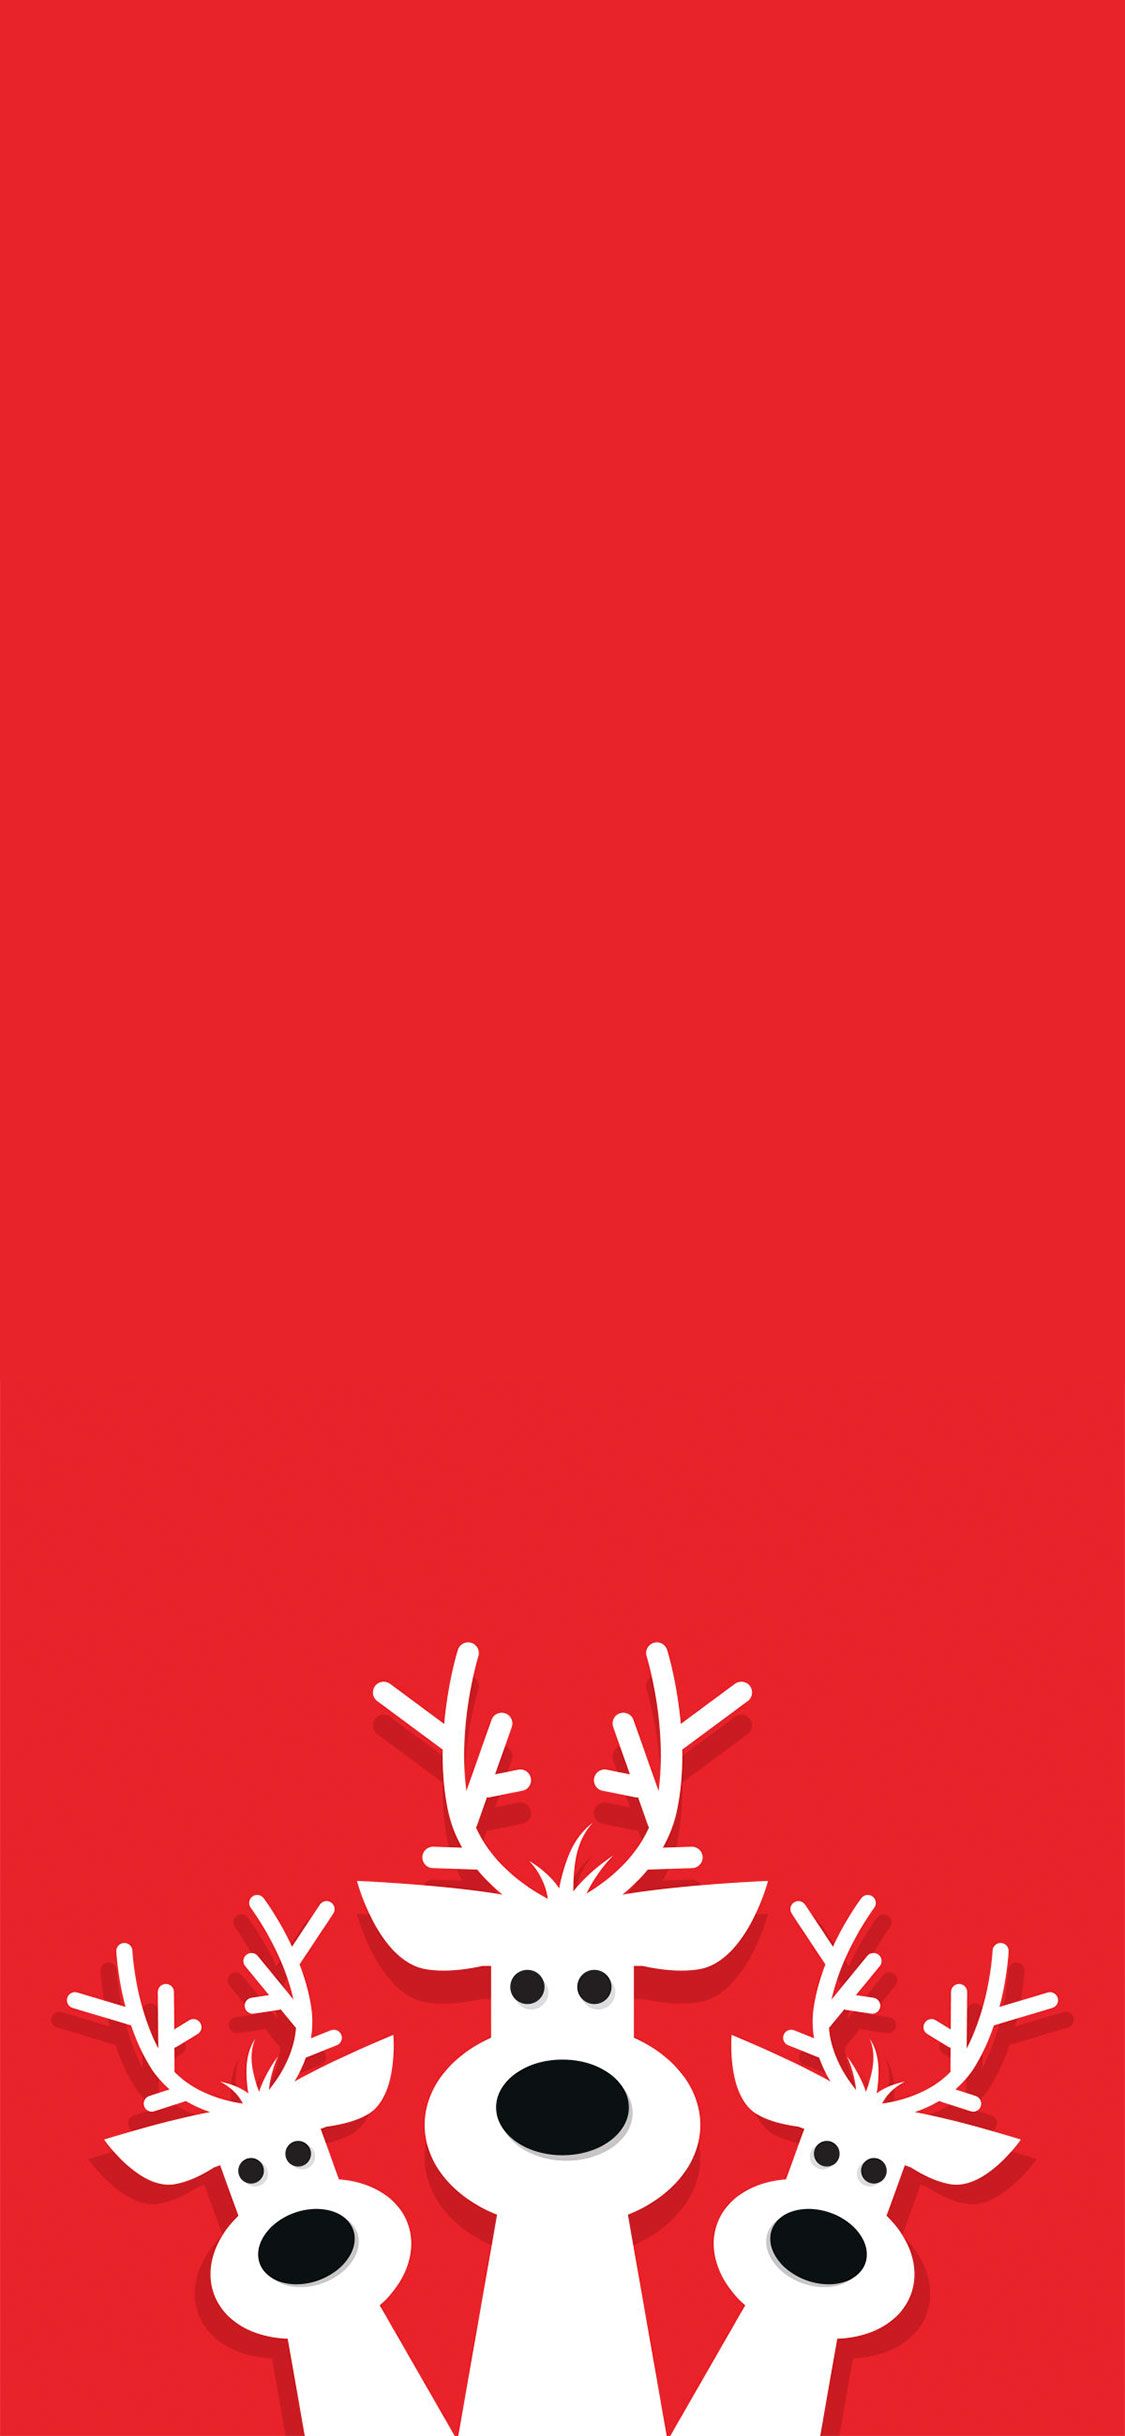 2021 Christmas Wallpapers for iPhone 6/7/8/SE/X/XS/XR/11/12